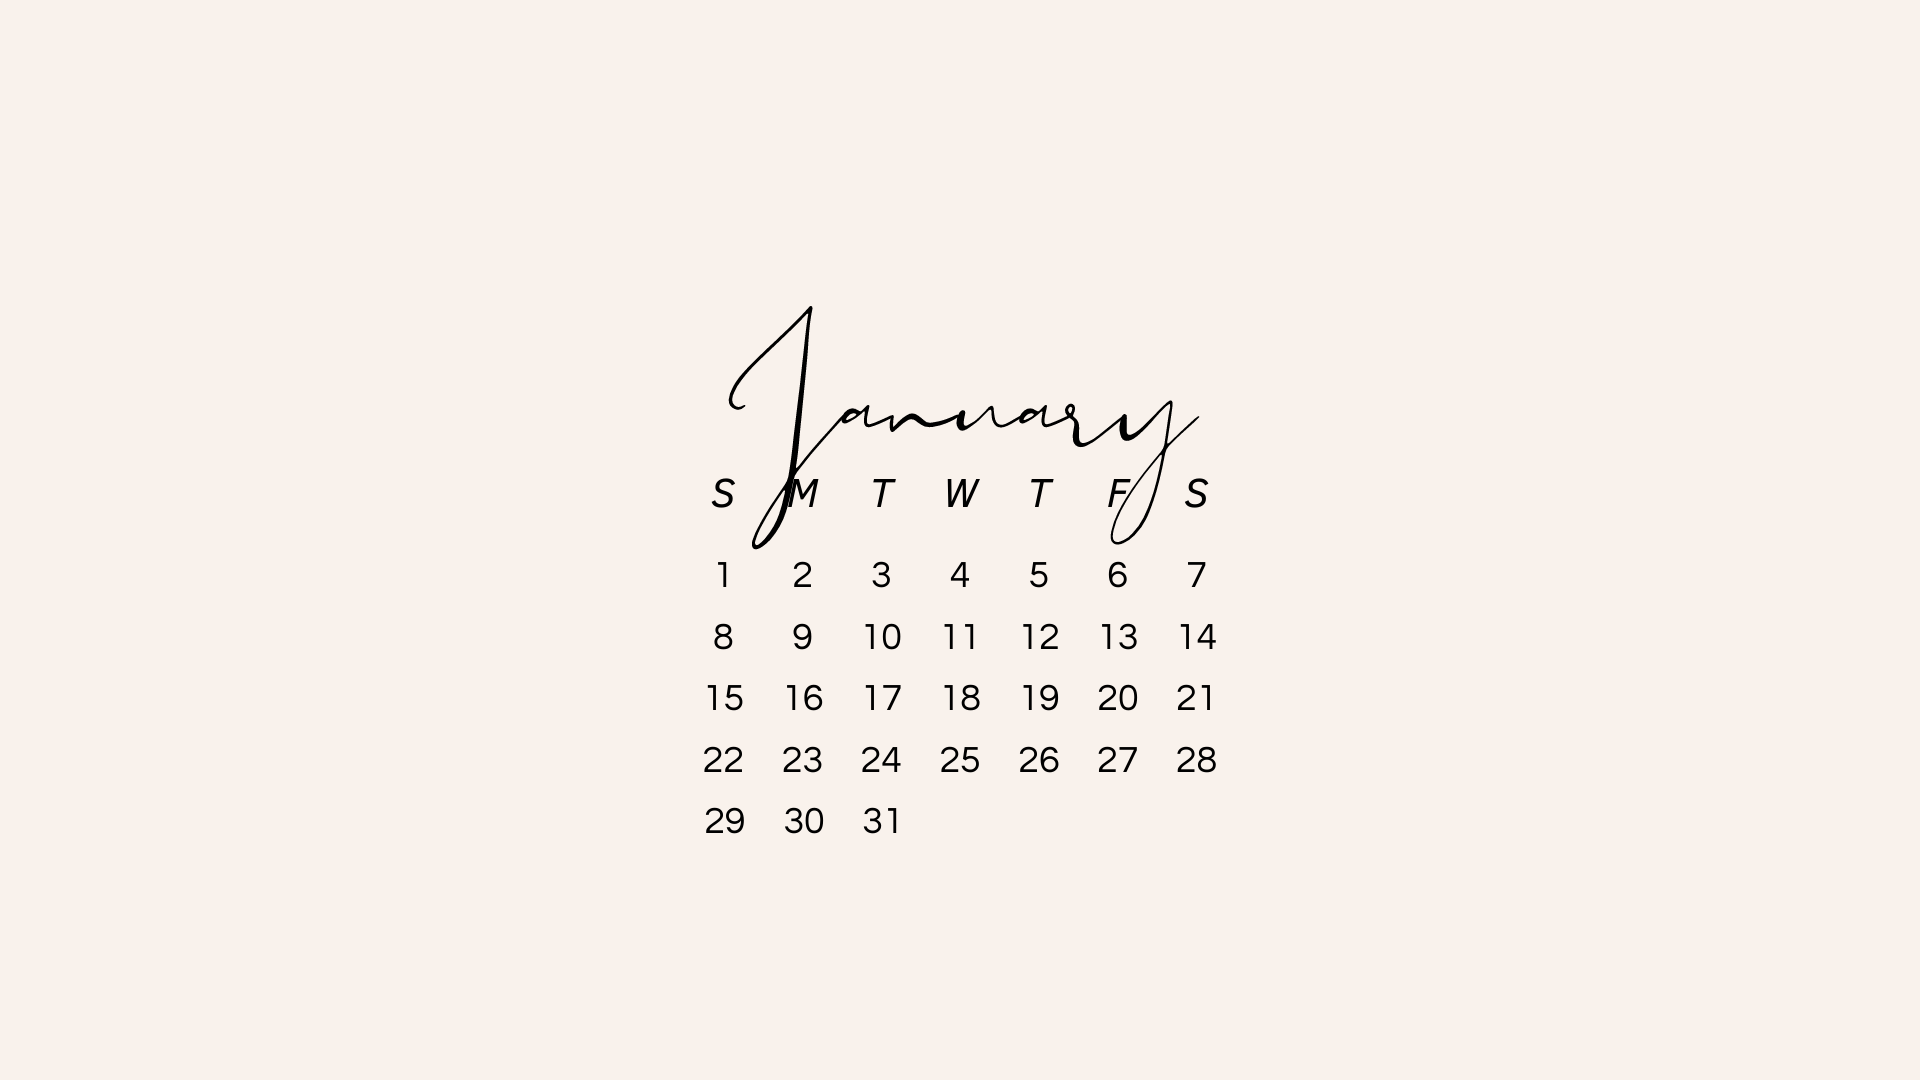 JANUARY 2023 desktop calendar backgrounds;  Here are your free January backgrounds for computers and laptops. Tech freebies for this month!